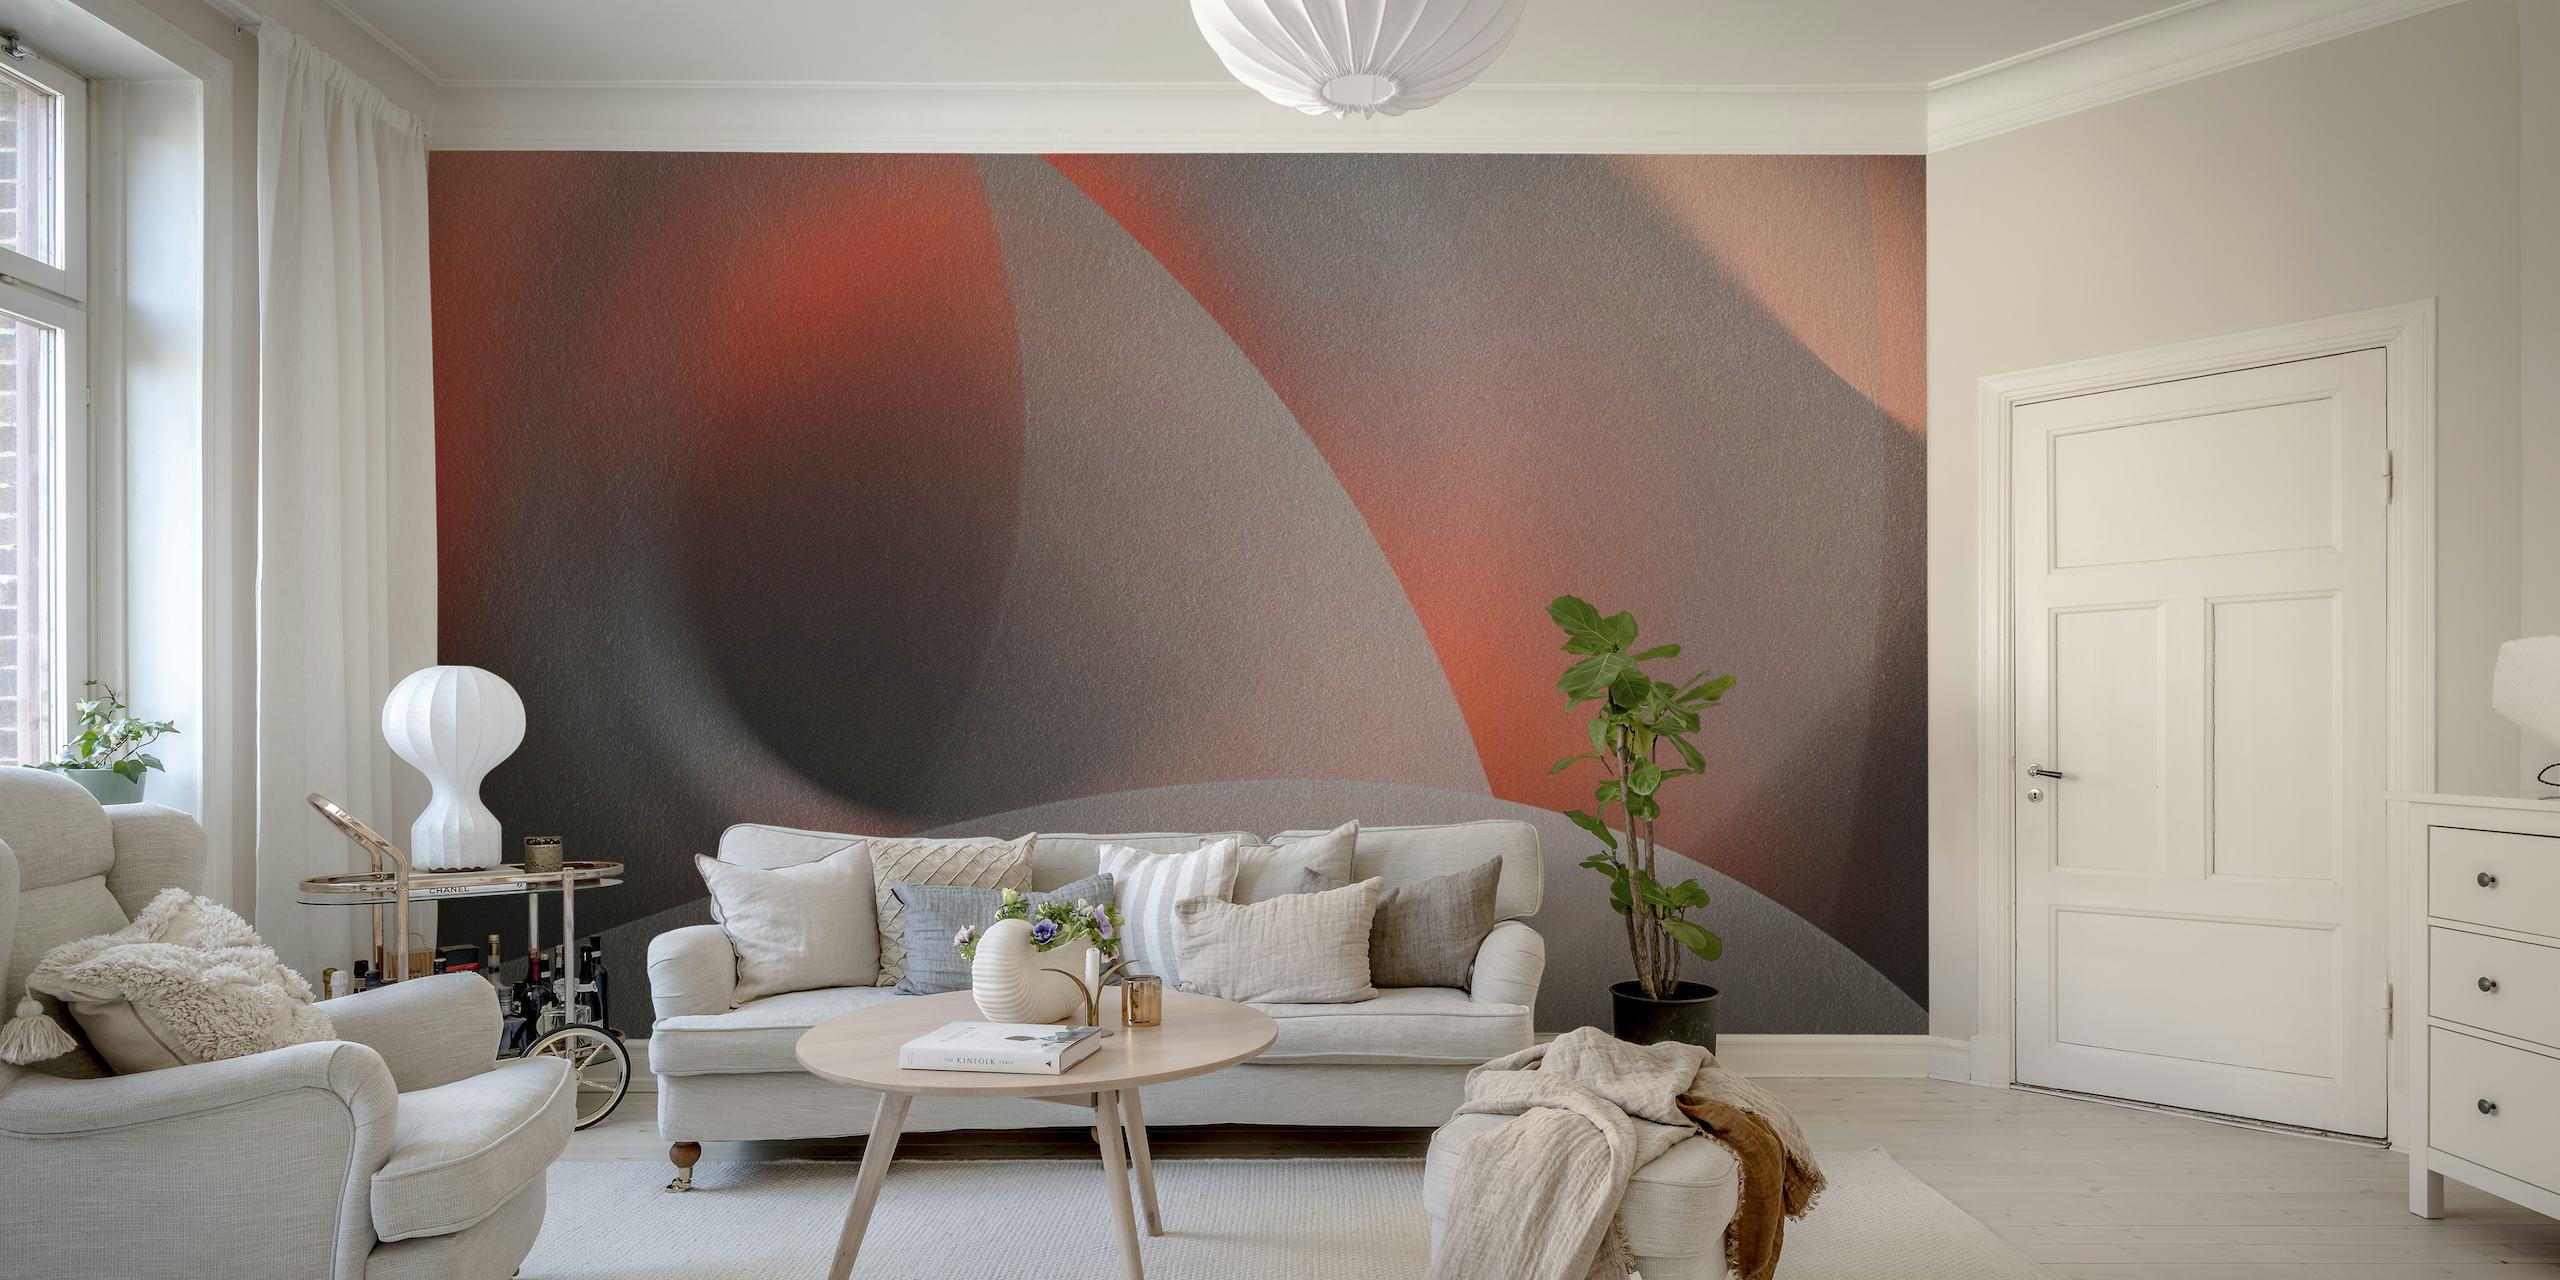 Abstract wall mural with swirling forms and red accents